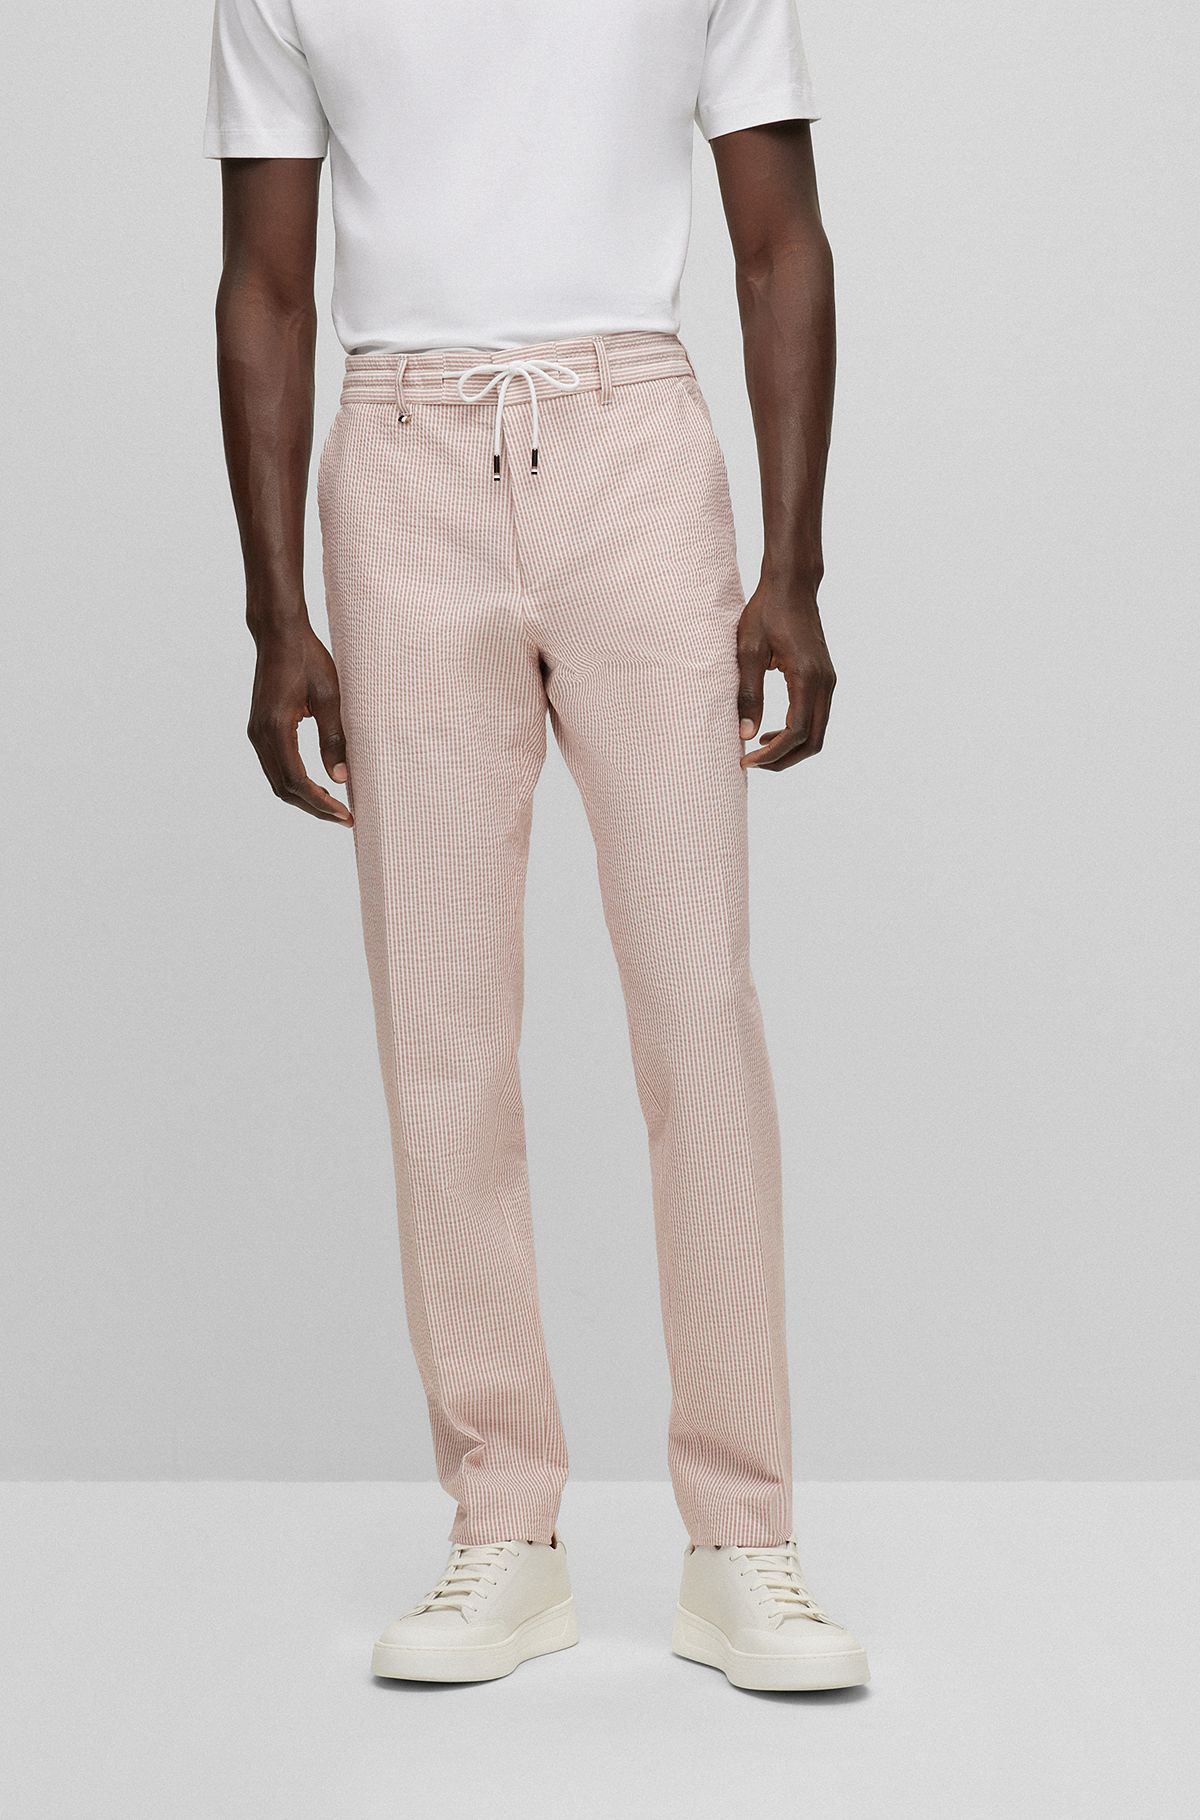 Slim-fit trousers in stretch-cotton seersucker, Light Red